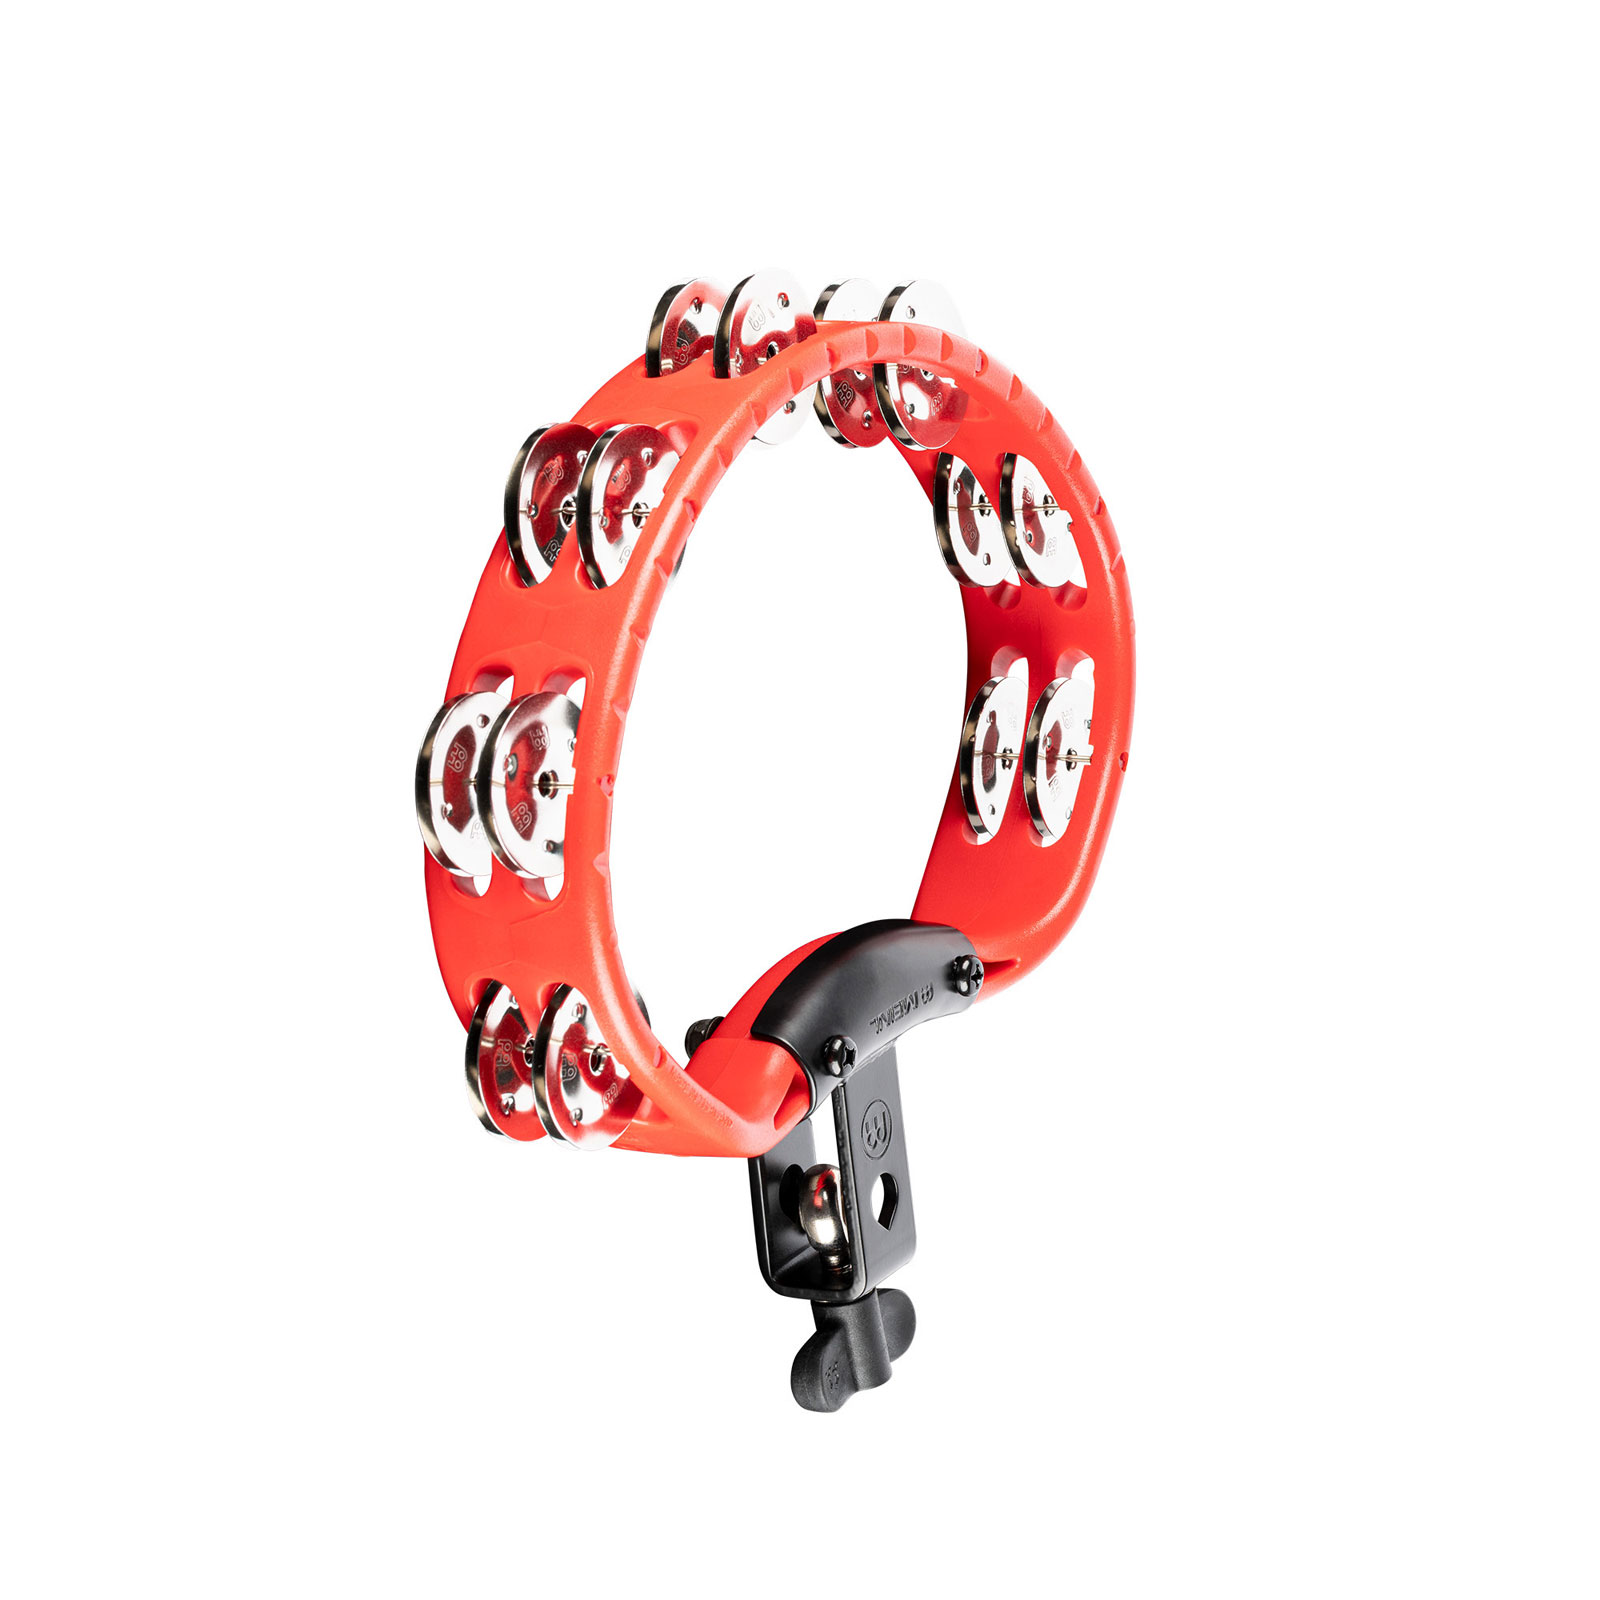 MEINL PERCUSSION HEADLINER SERIES MOUNTABLE ABS TAMBOURINE, DUAL ROW, RED, STAINLESS STEEL JINGLES